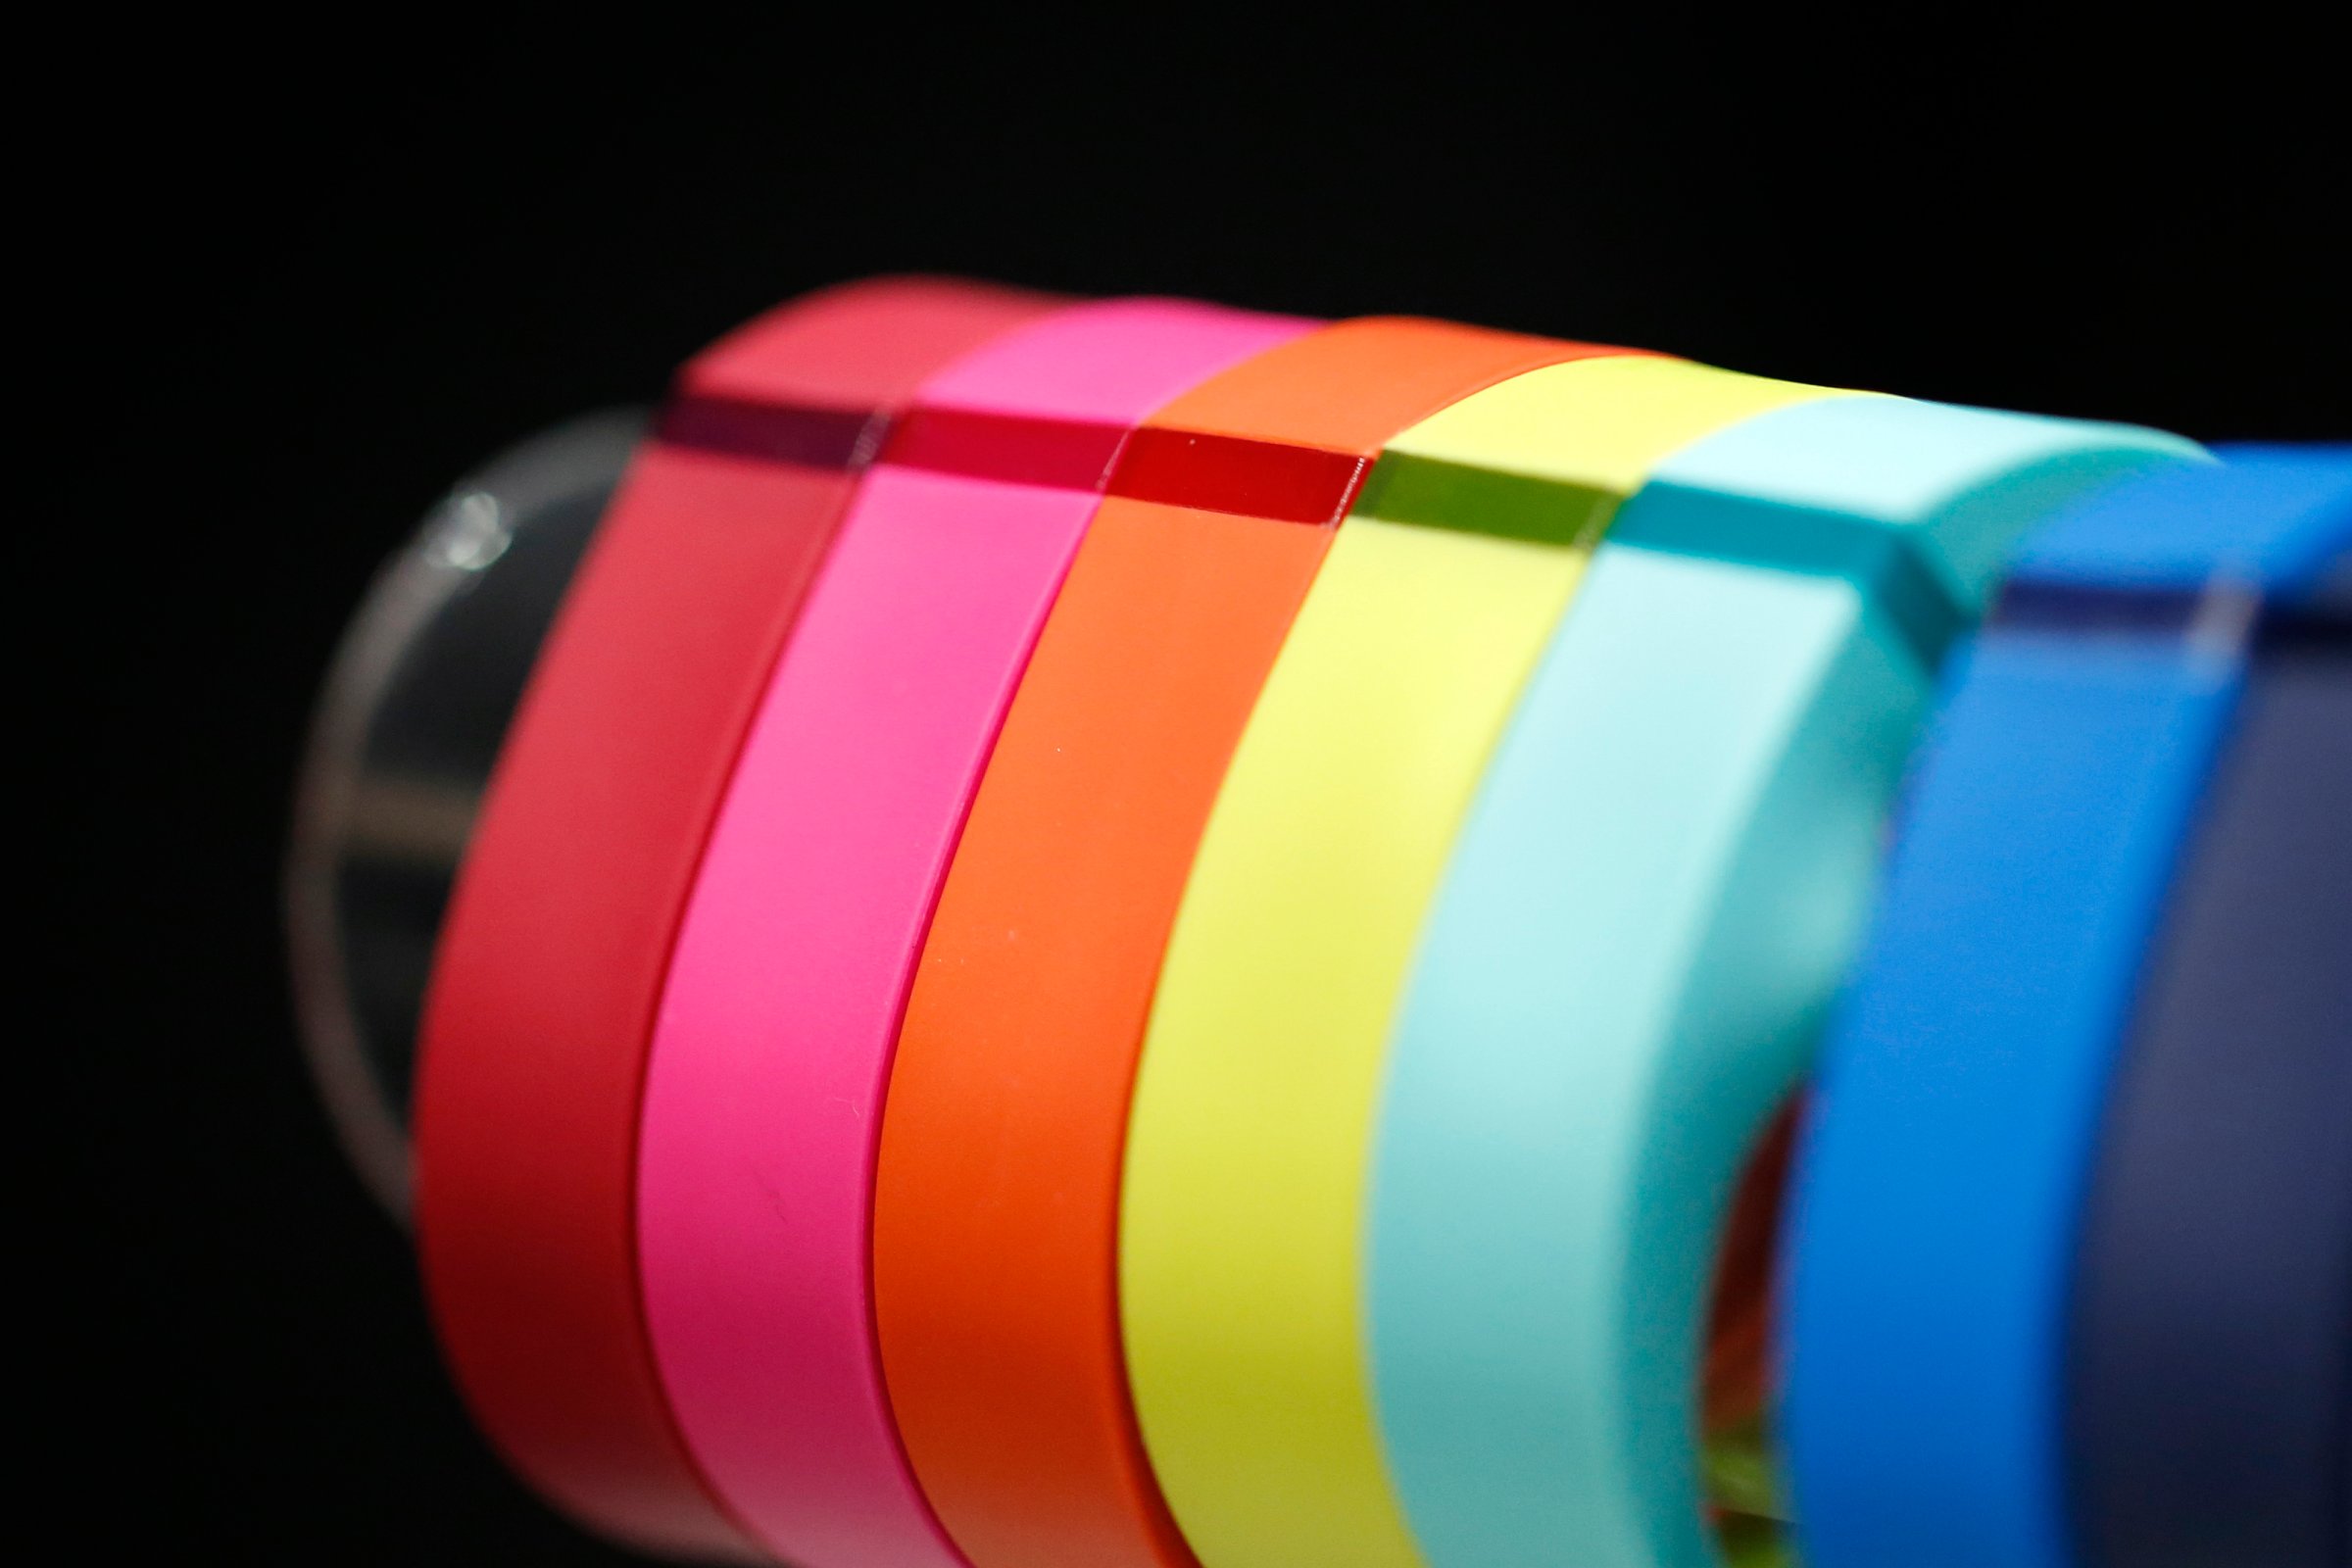 Latest Products At The Wearable Device Technology Expo